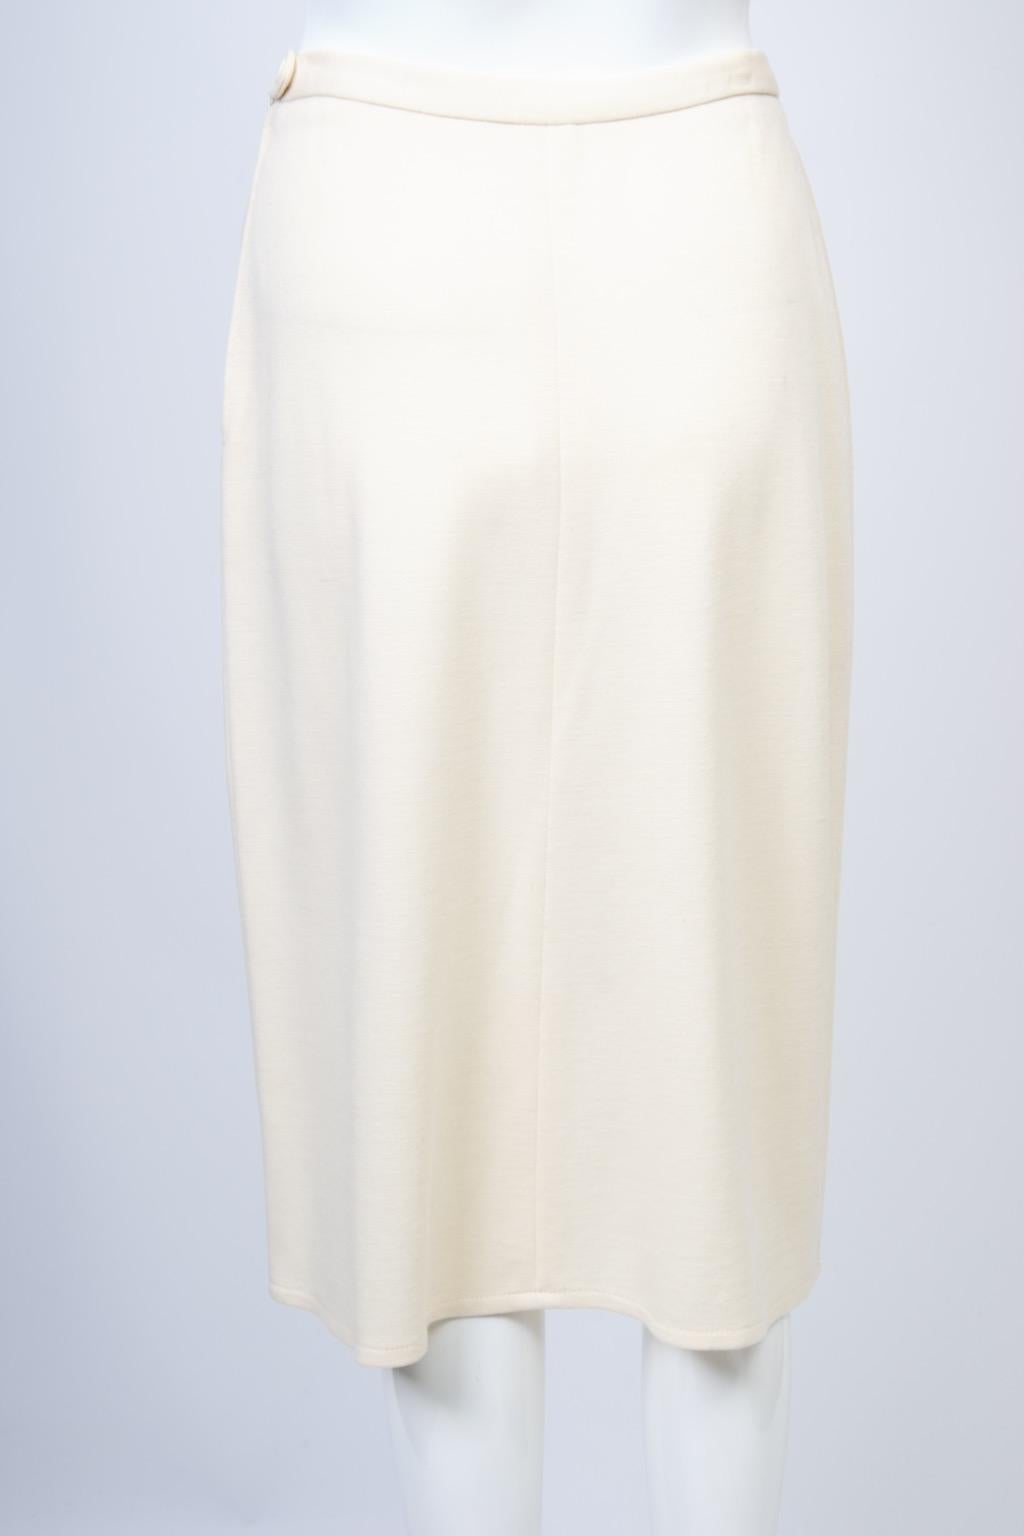 Sonia Rykiel Ivory Sweater and Skirt Ensemble For Sale 8